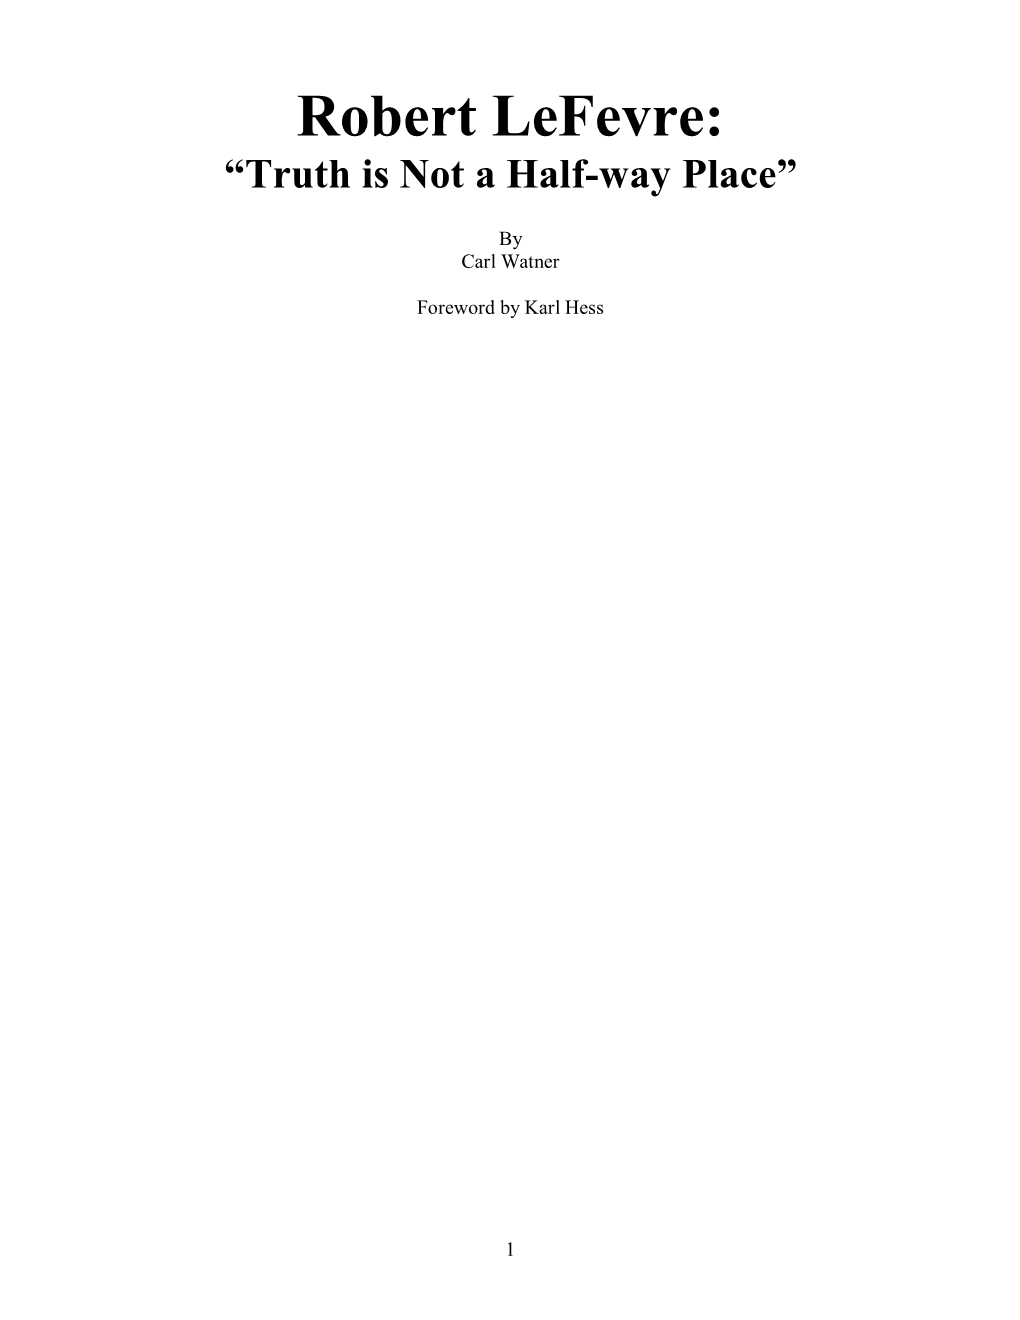 Robert Lefevre: “Truth Is Not a Half-Way Place”